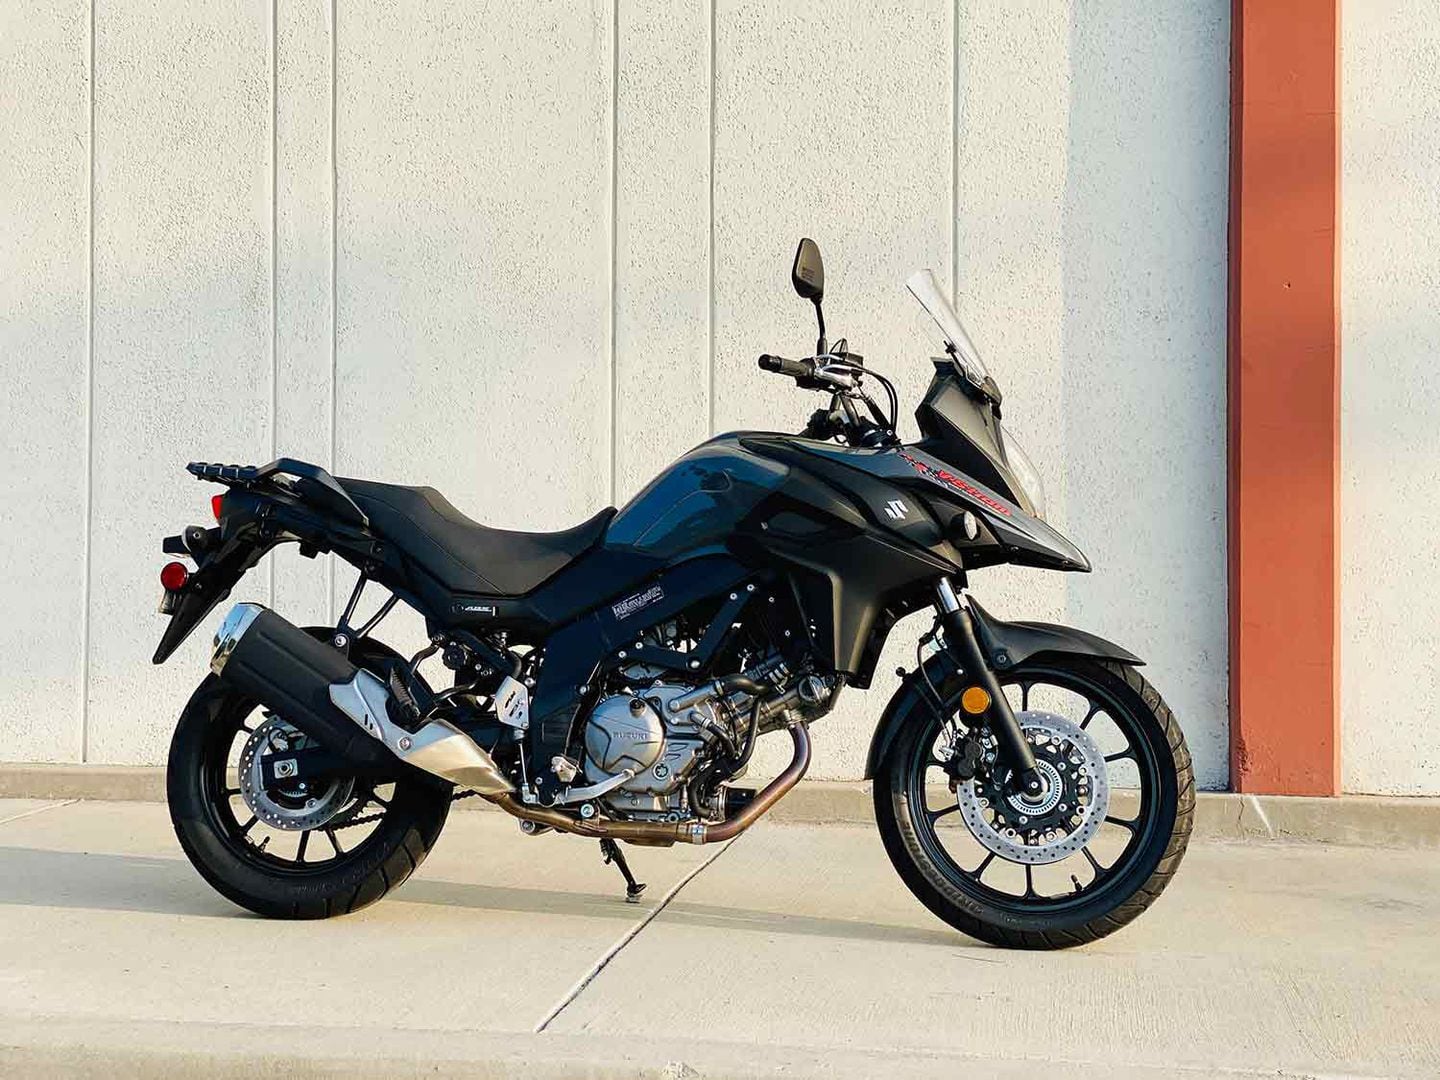 2020 Suzuki V-Strom 650 Review—An Exercise In Adventure Purity